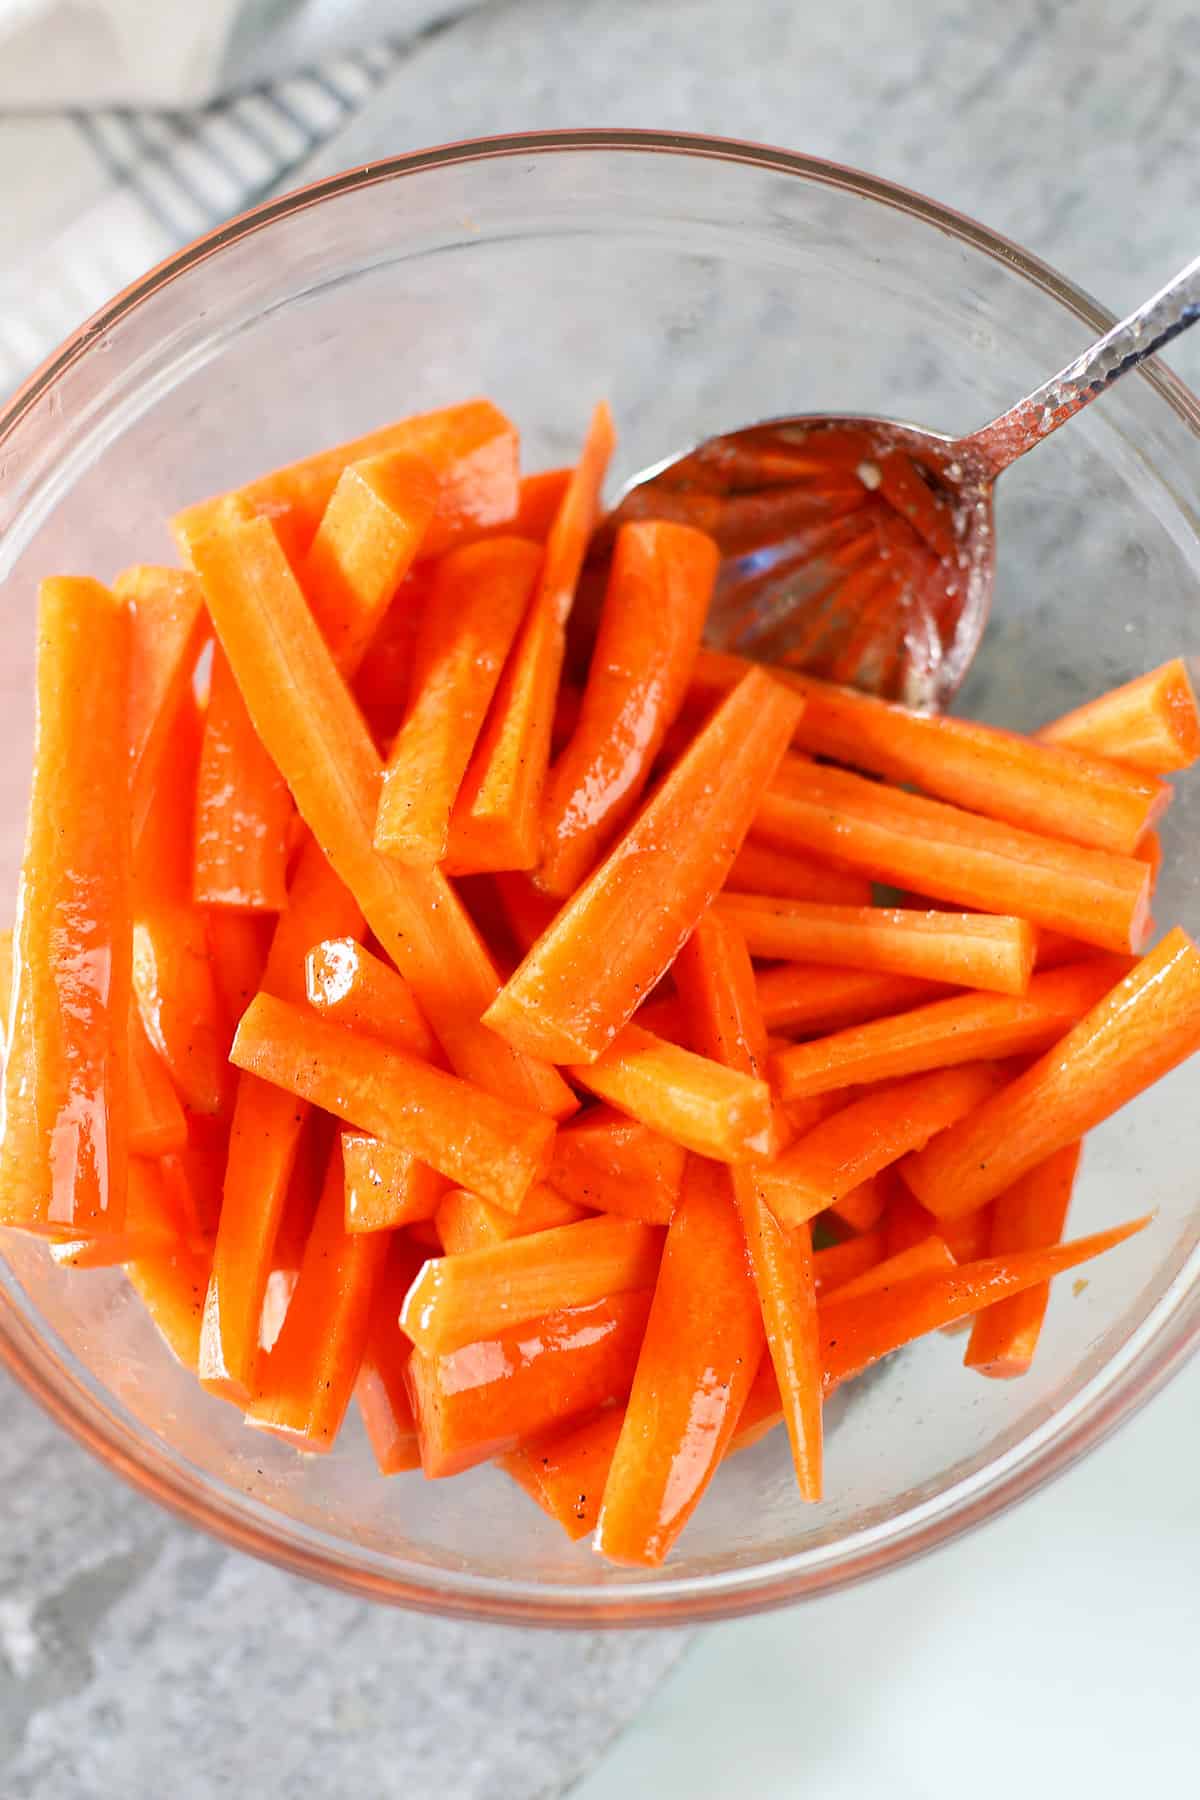 Tossing sliced carrots in maple syrup and butter